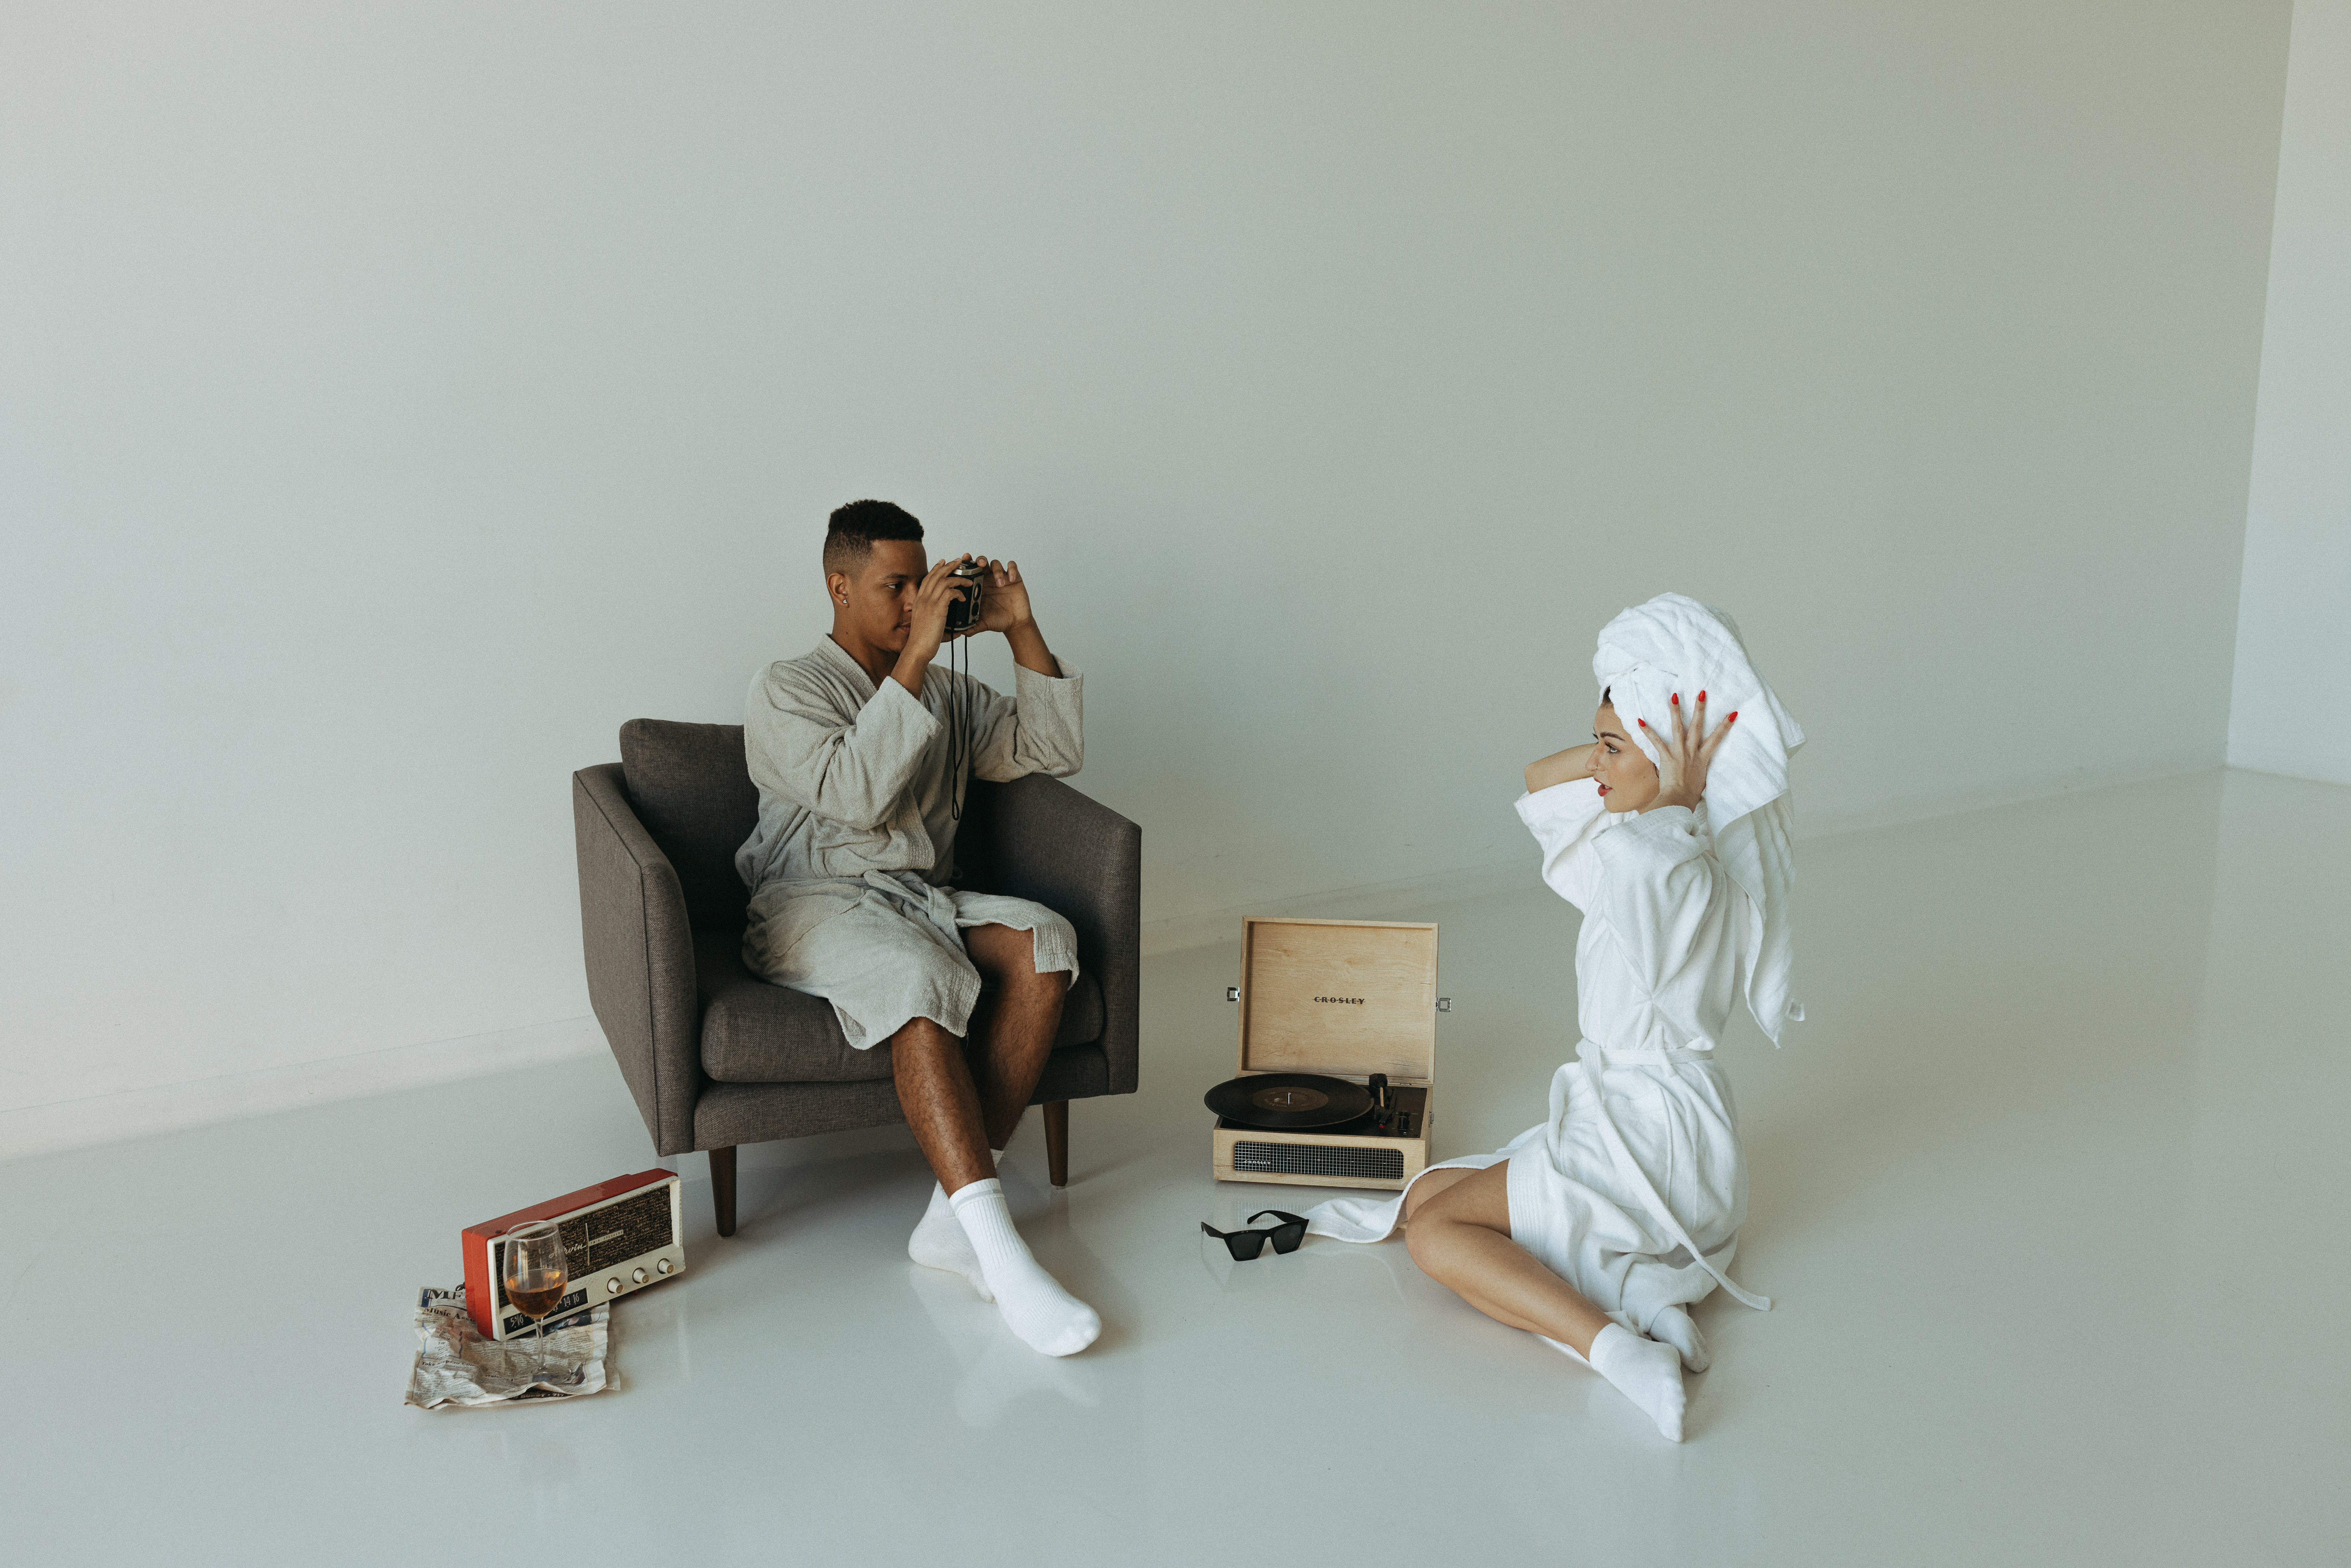 A couple in robes relaxing on a chair and listening to music from an old record player